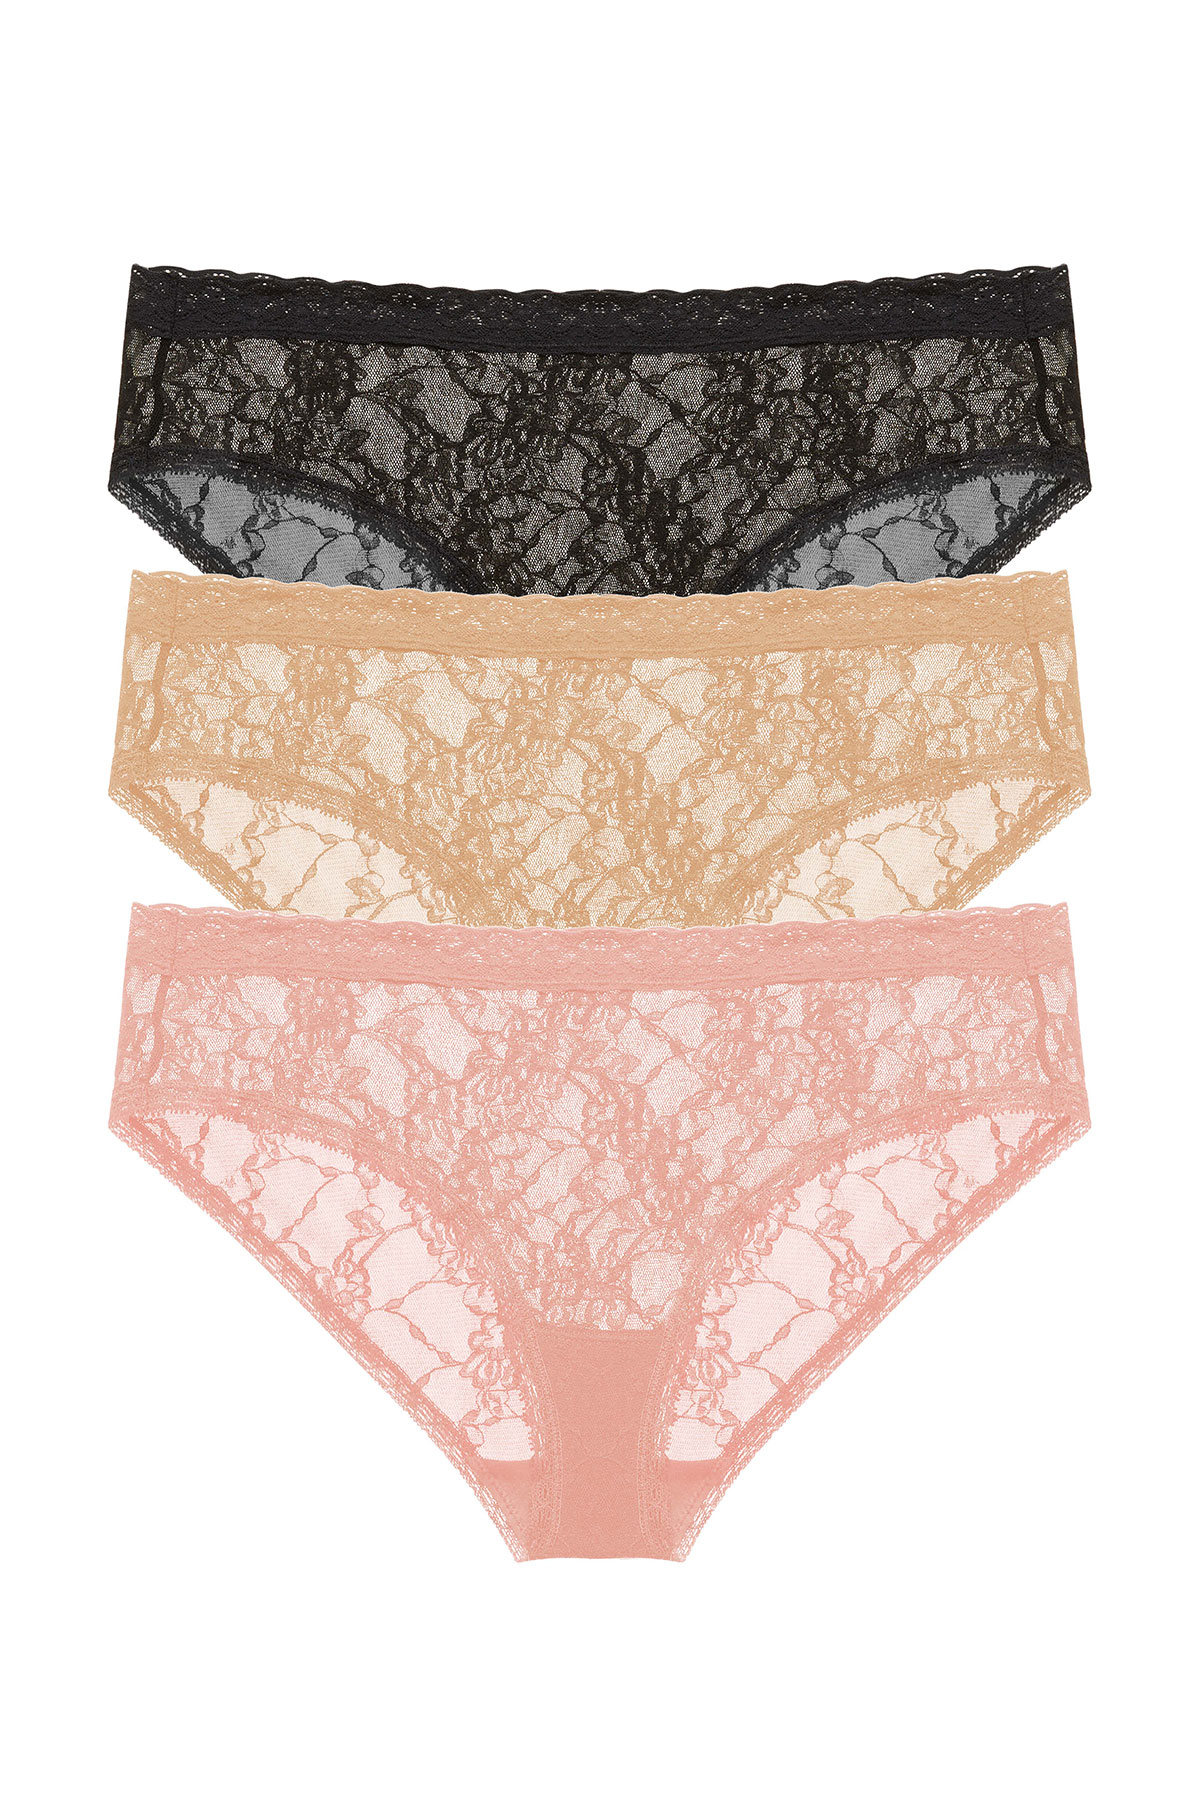 Natori Lingerie Delivers Another Stellar Collection: Bliss Allure